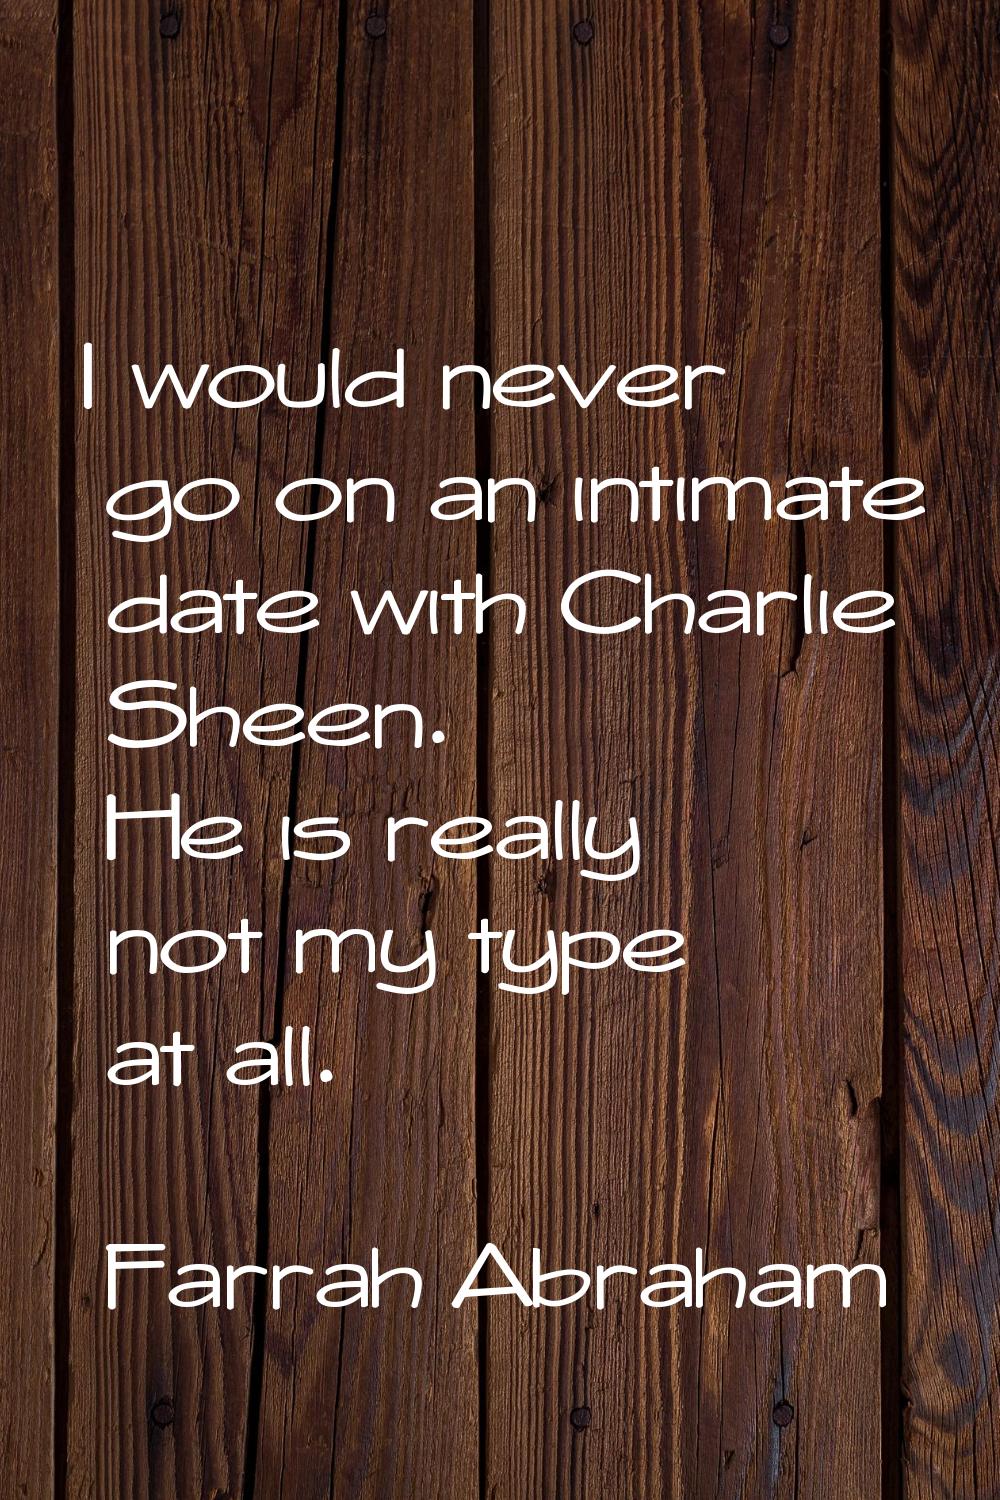 I would never go on an intimate date with Charlie Sheen. He is really not my type at all.